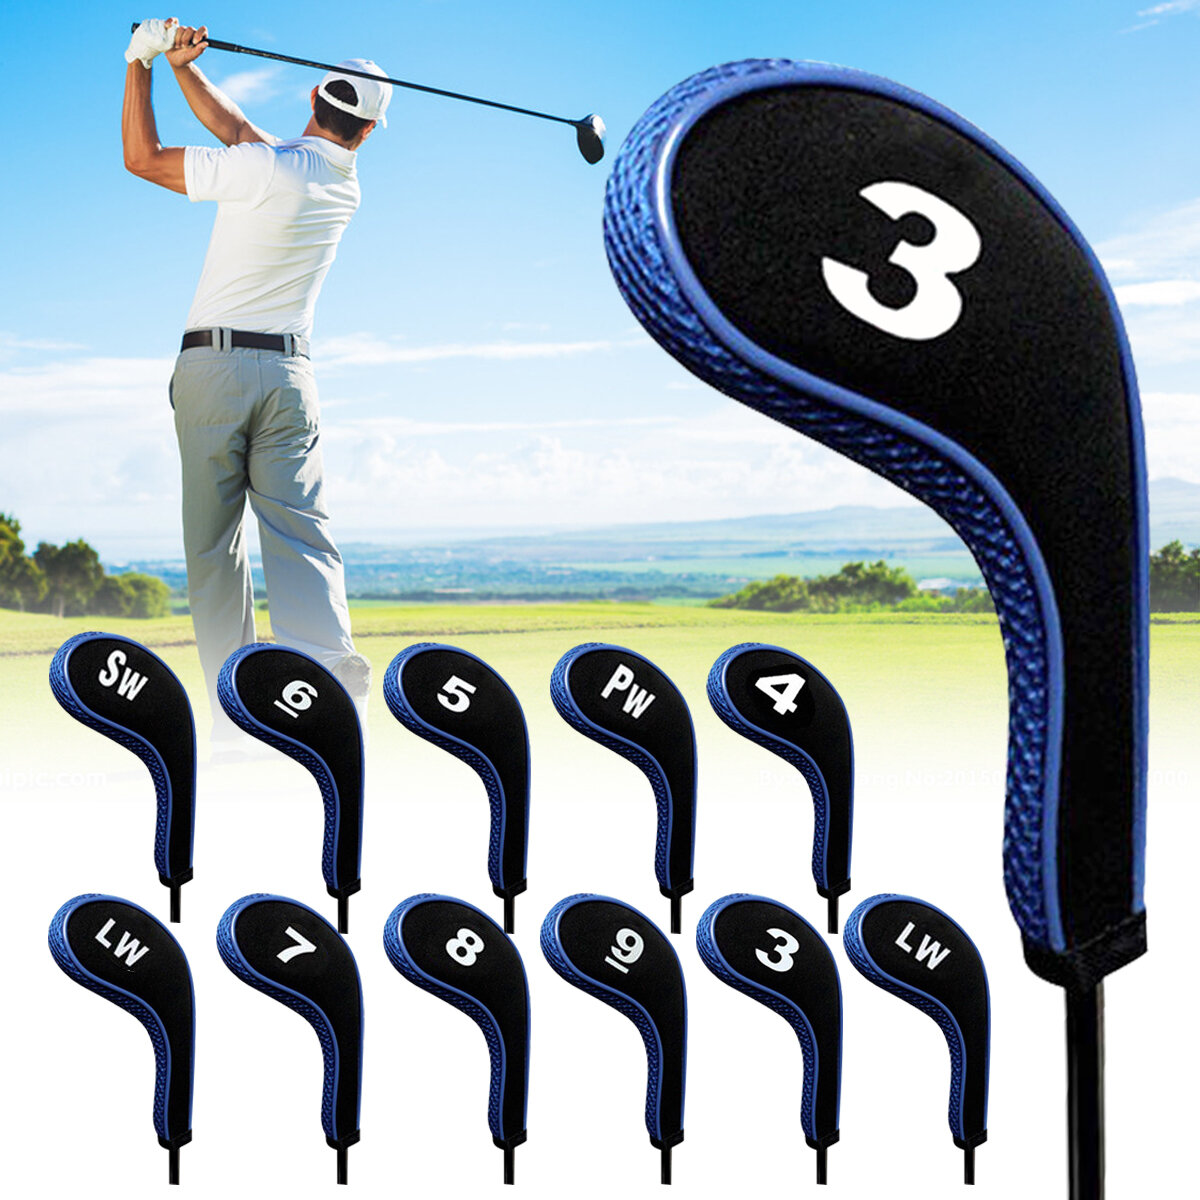 

12Pcs/set Golf Clubs Iron Head Covers Driver Professional Number Tag Headcovers Rubber Golf Long Neck Protector Case wit